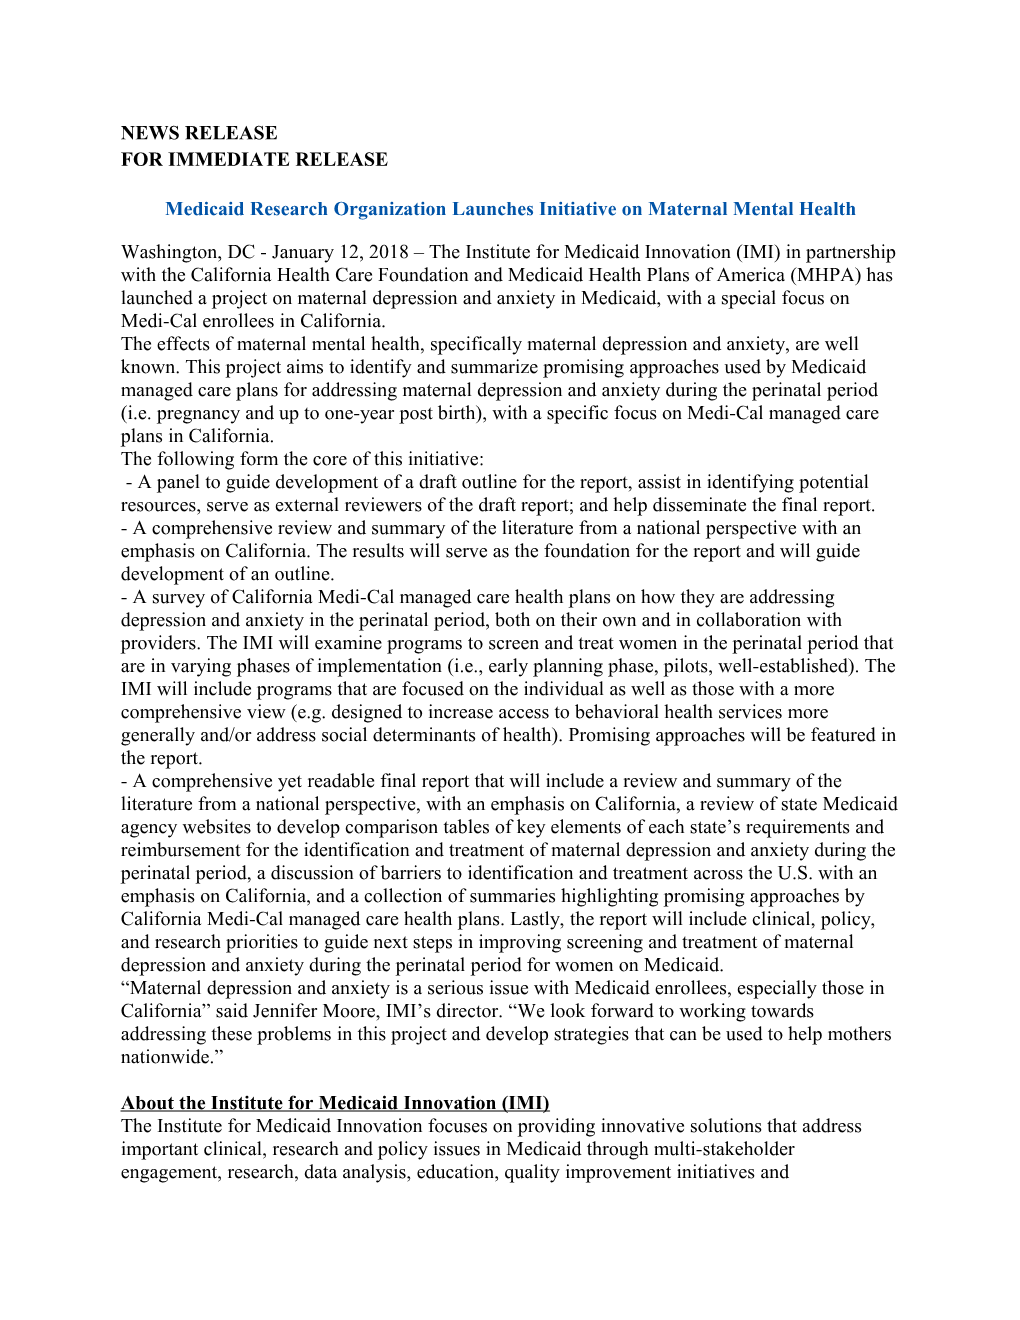 Medicaid Research Organization Launchesinitiative on Maternal Mental Health